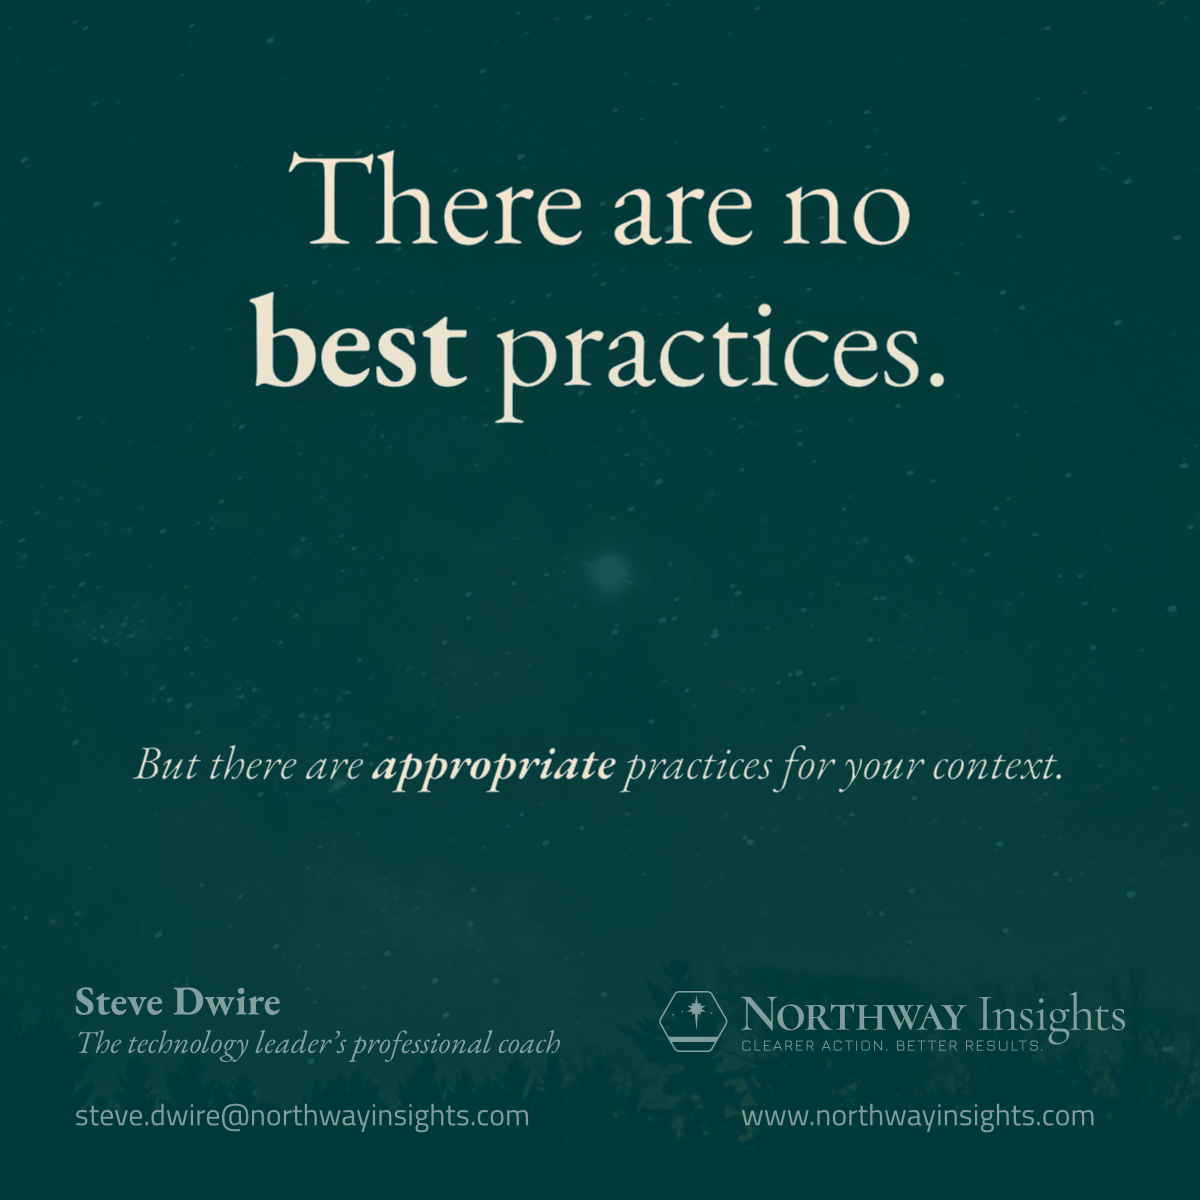 There are no best practices. (But there are appropriate practices for your context.)